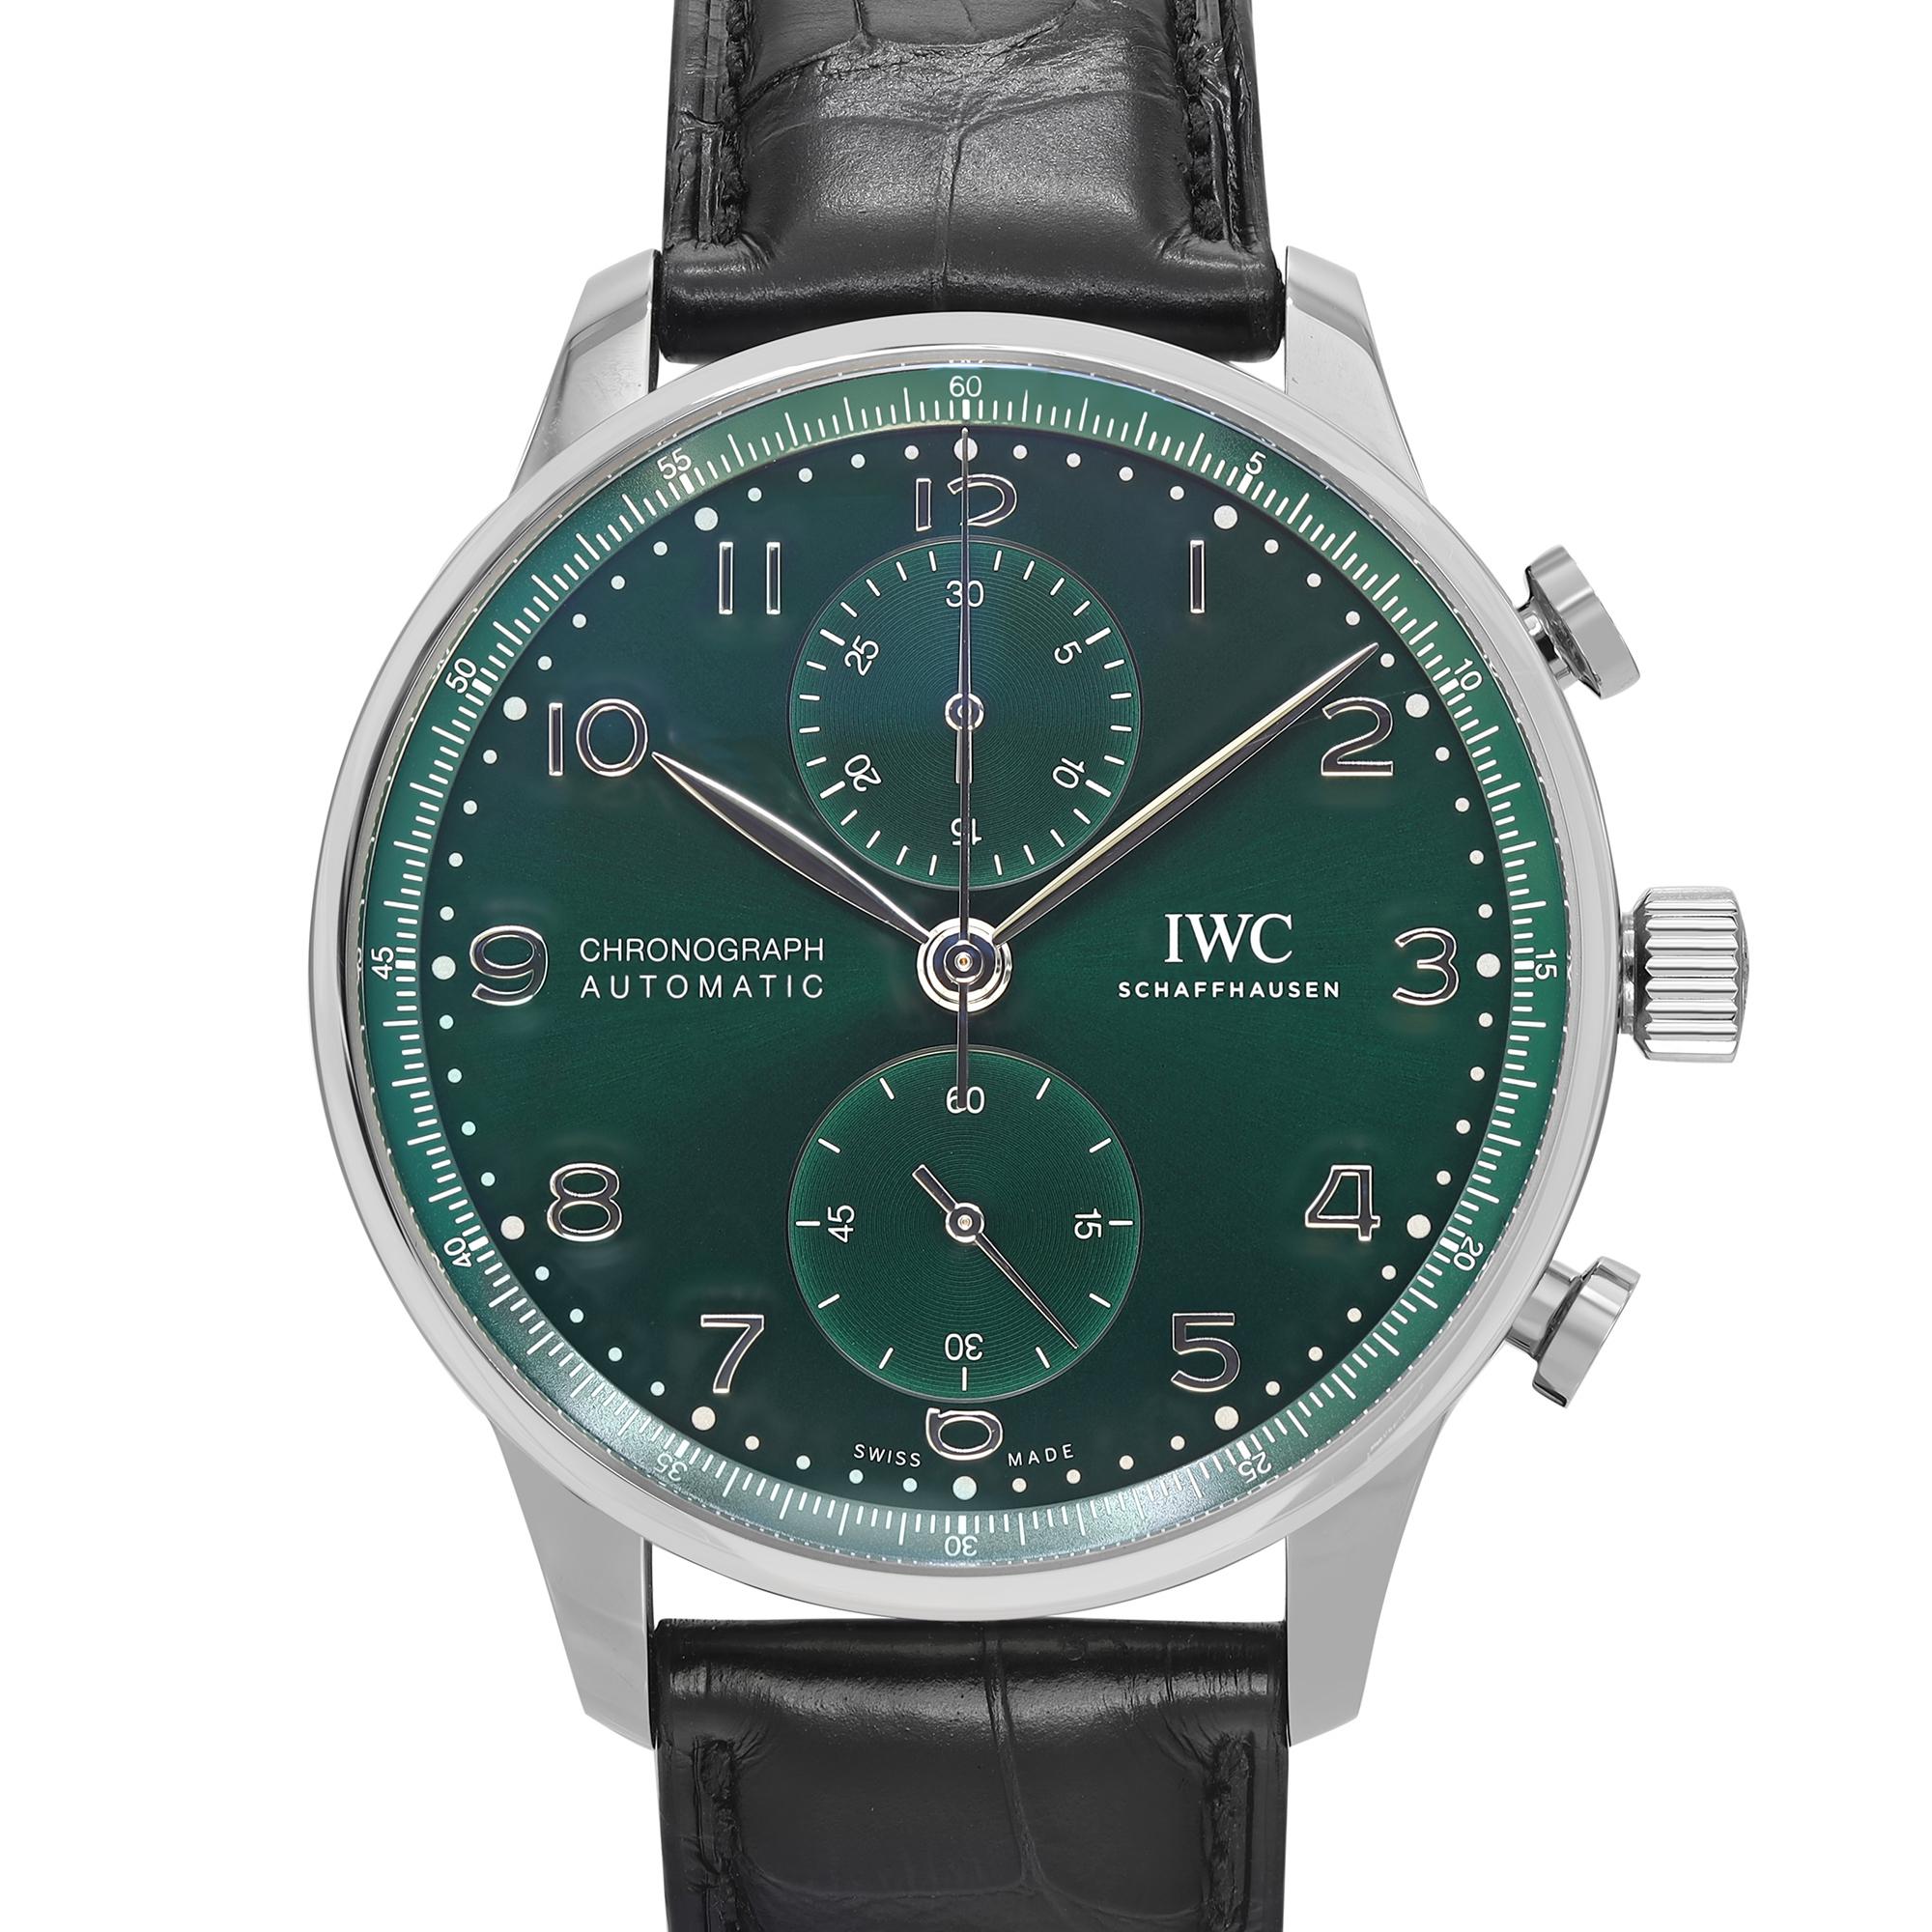 Unworn IWC Men's Wristwatch IW371615. This beauty has a 41 mm case size and an adjustable wrist fit of up to 8 inches, making it perfect for anyone. Plus, it comes with the original packaging and papers, and the Chronostore offers a 3-years